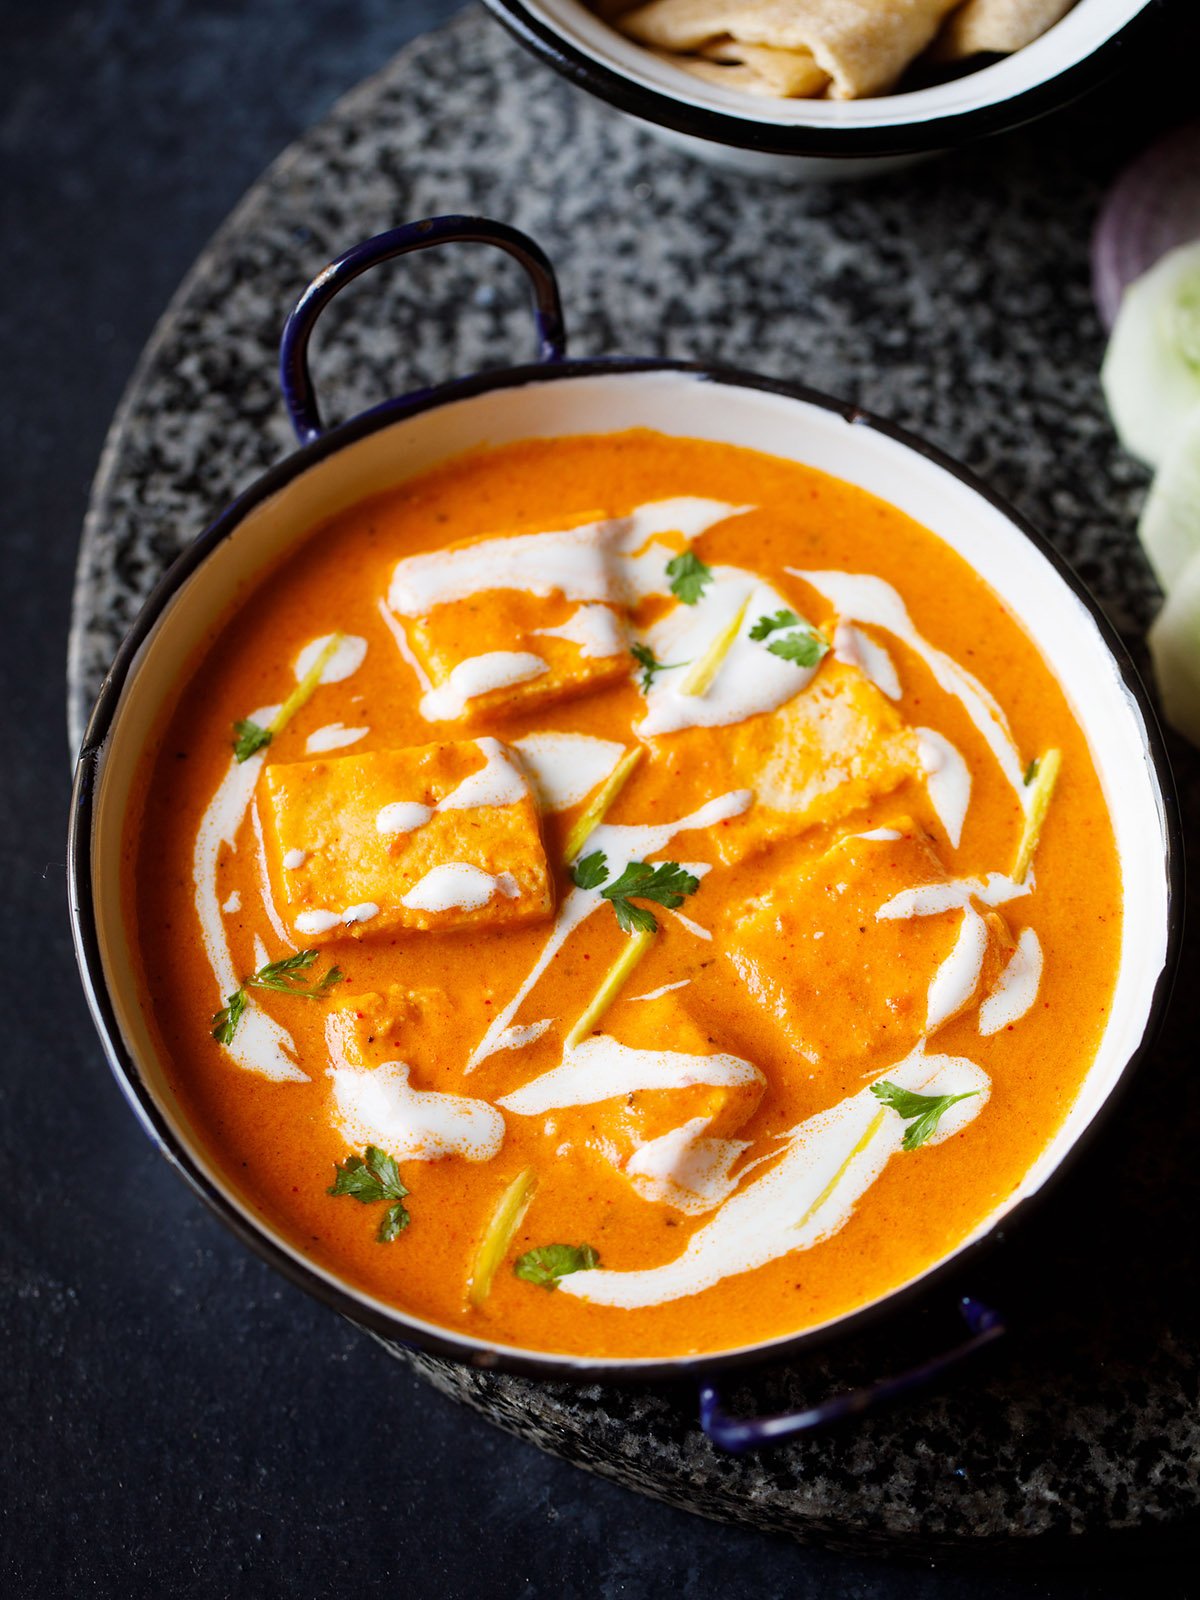 Make Spicey Food Of India How To Make Paneer Butter Masala